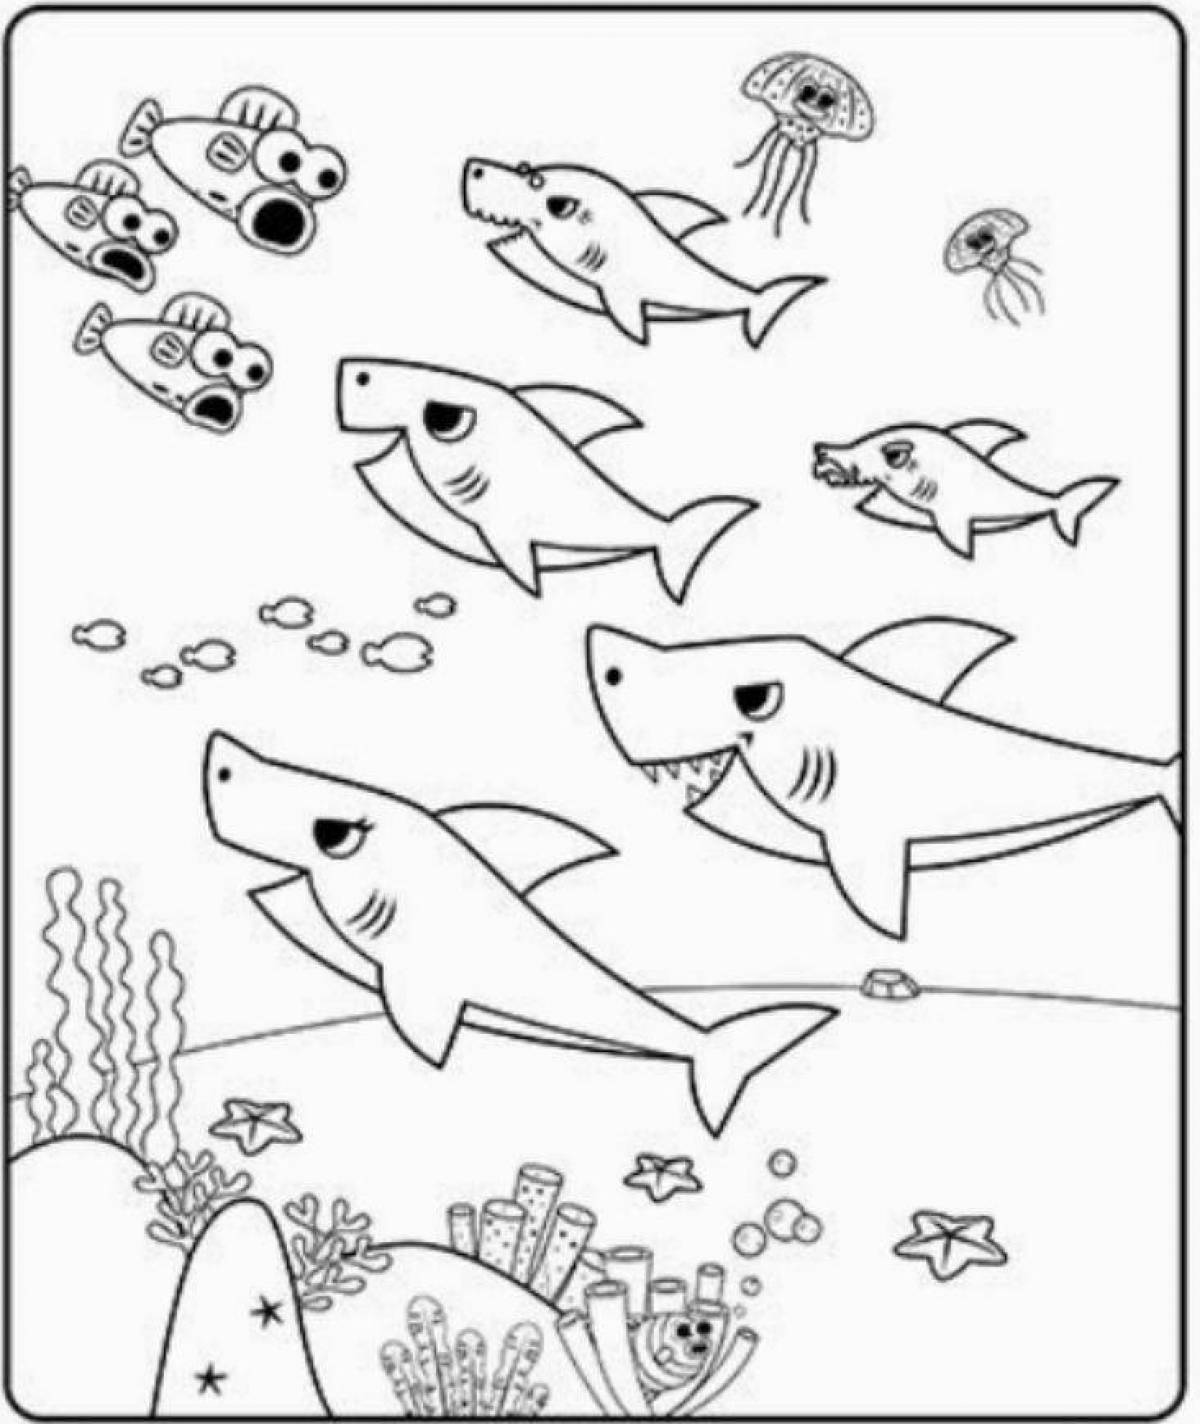 Fun coloring book for kids with sharks